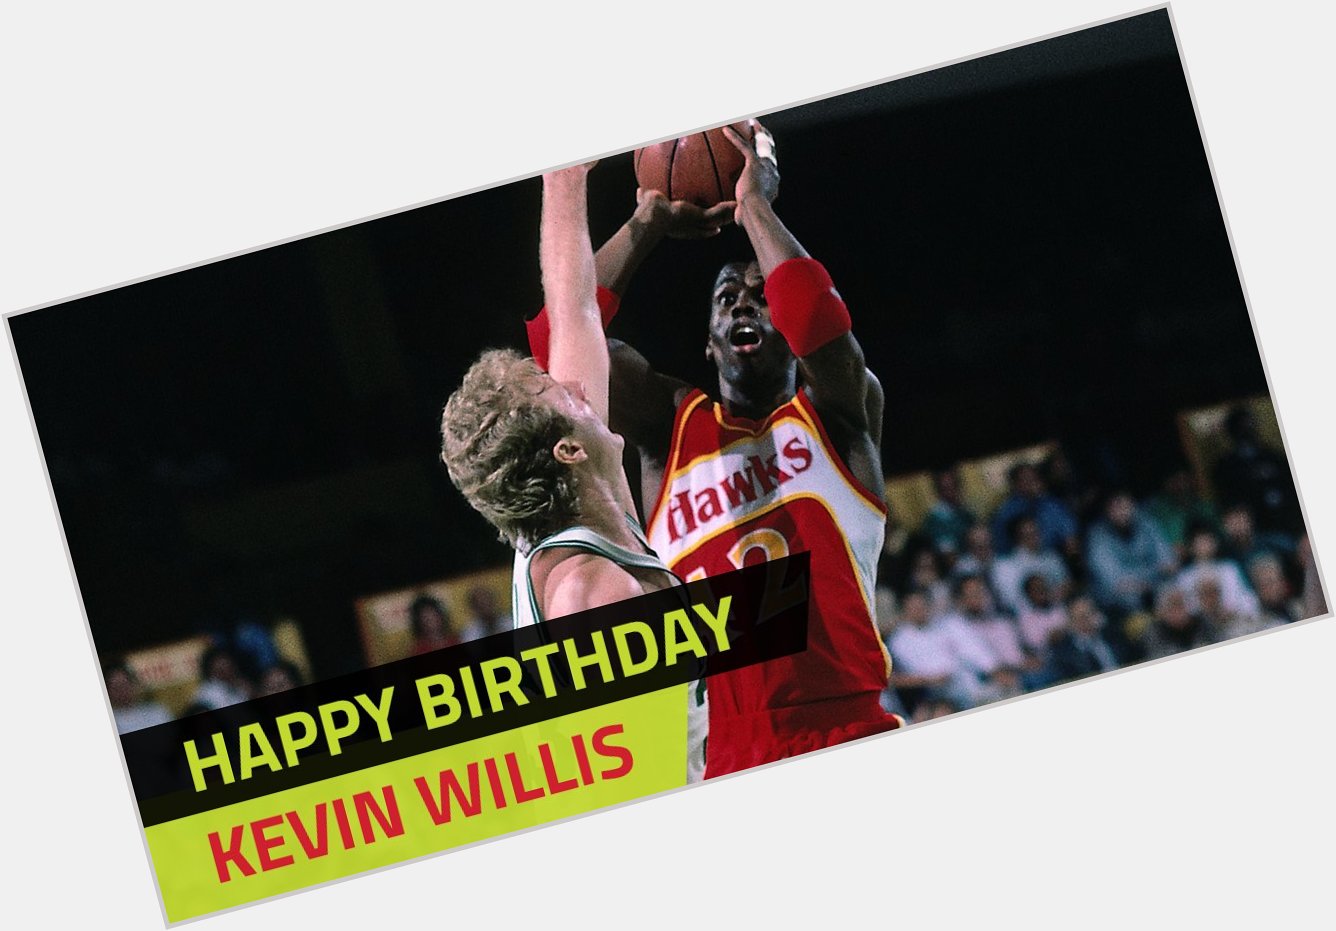 REmessage to join us in wishing Kevin Willis a Happy Birthday today!     